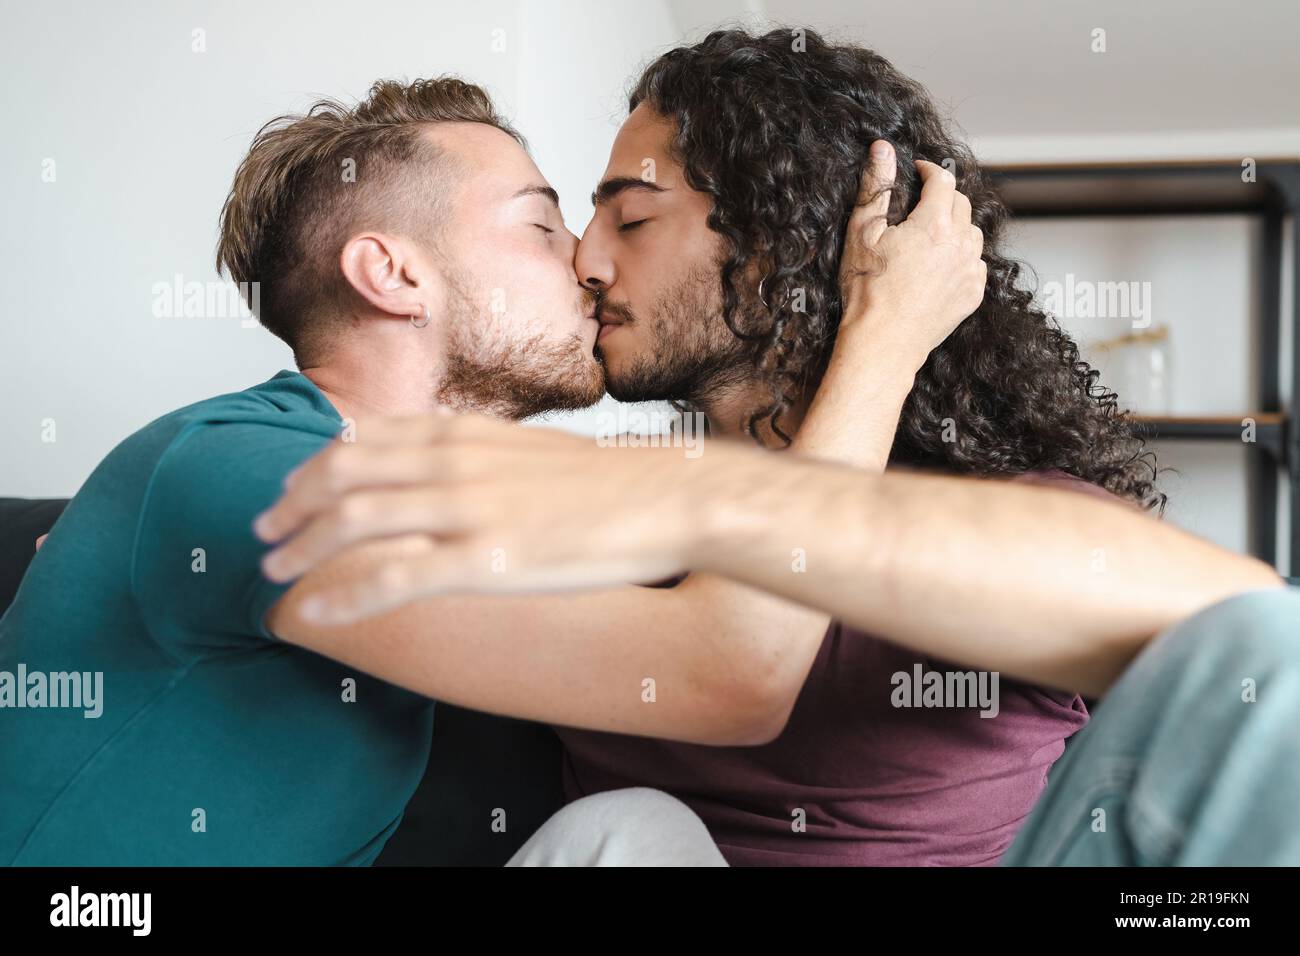 A loving gay couple, one with short light hair and the other with long dark hair, share a tender kiss on the lips while sitting on a sofa, both wearin Stock Photo